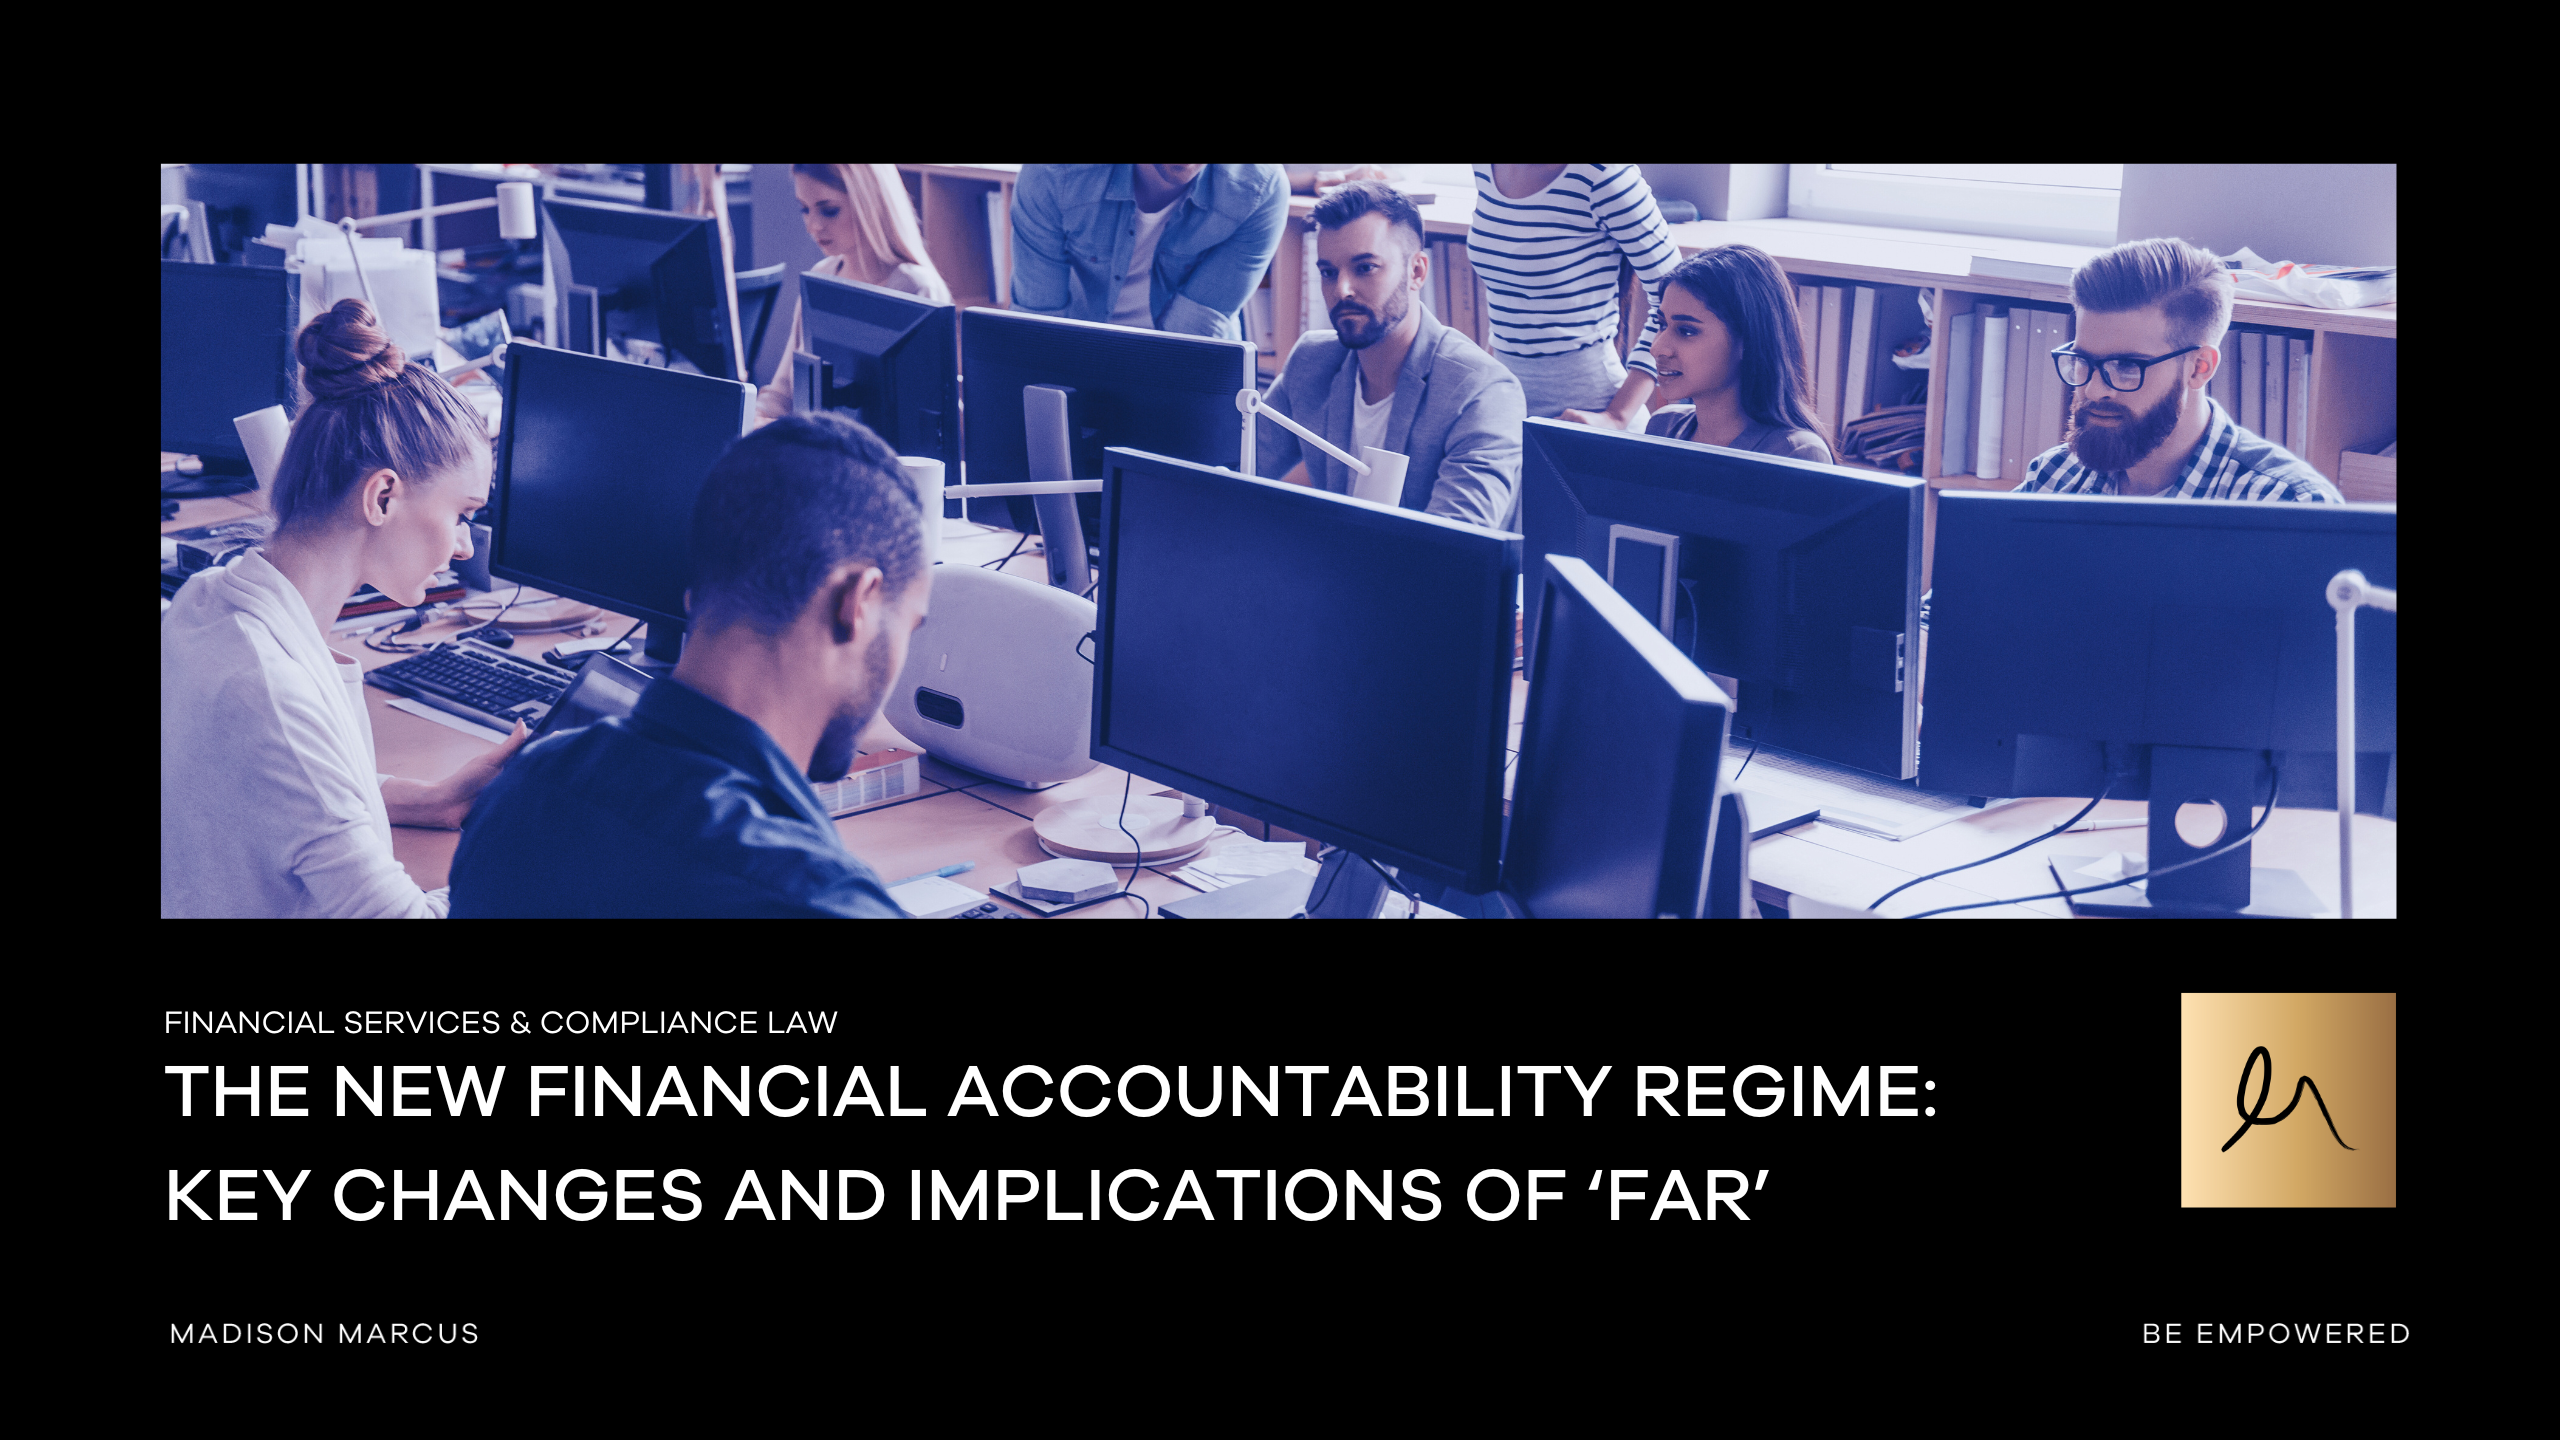 FAR is Here & Now– Accountability in the Financial Sector